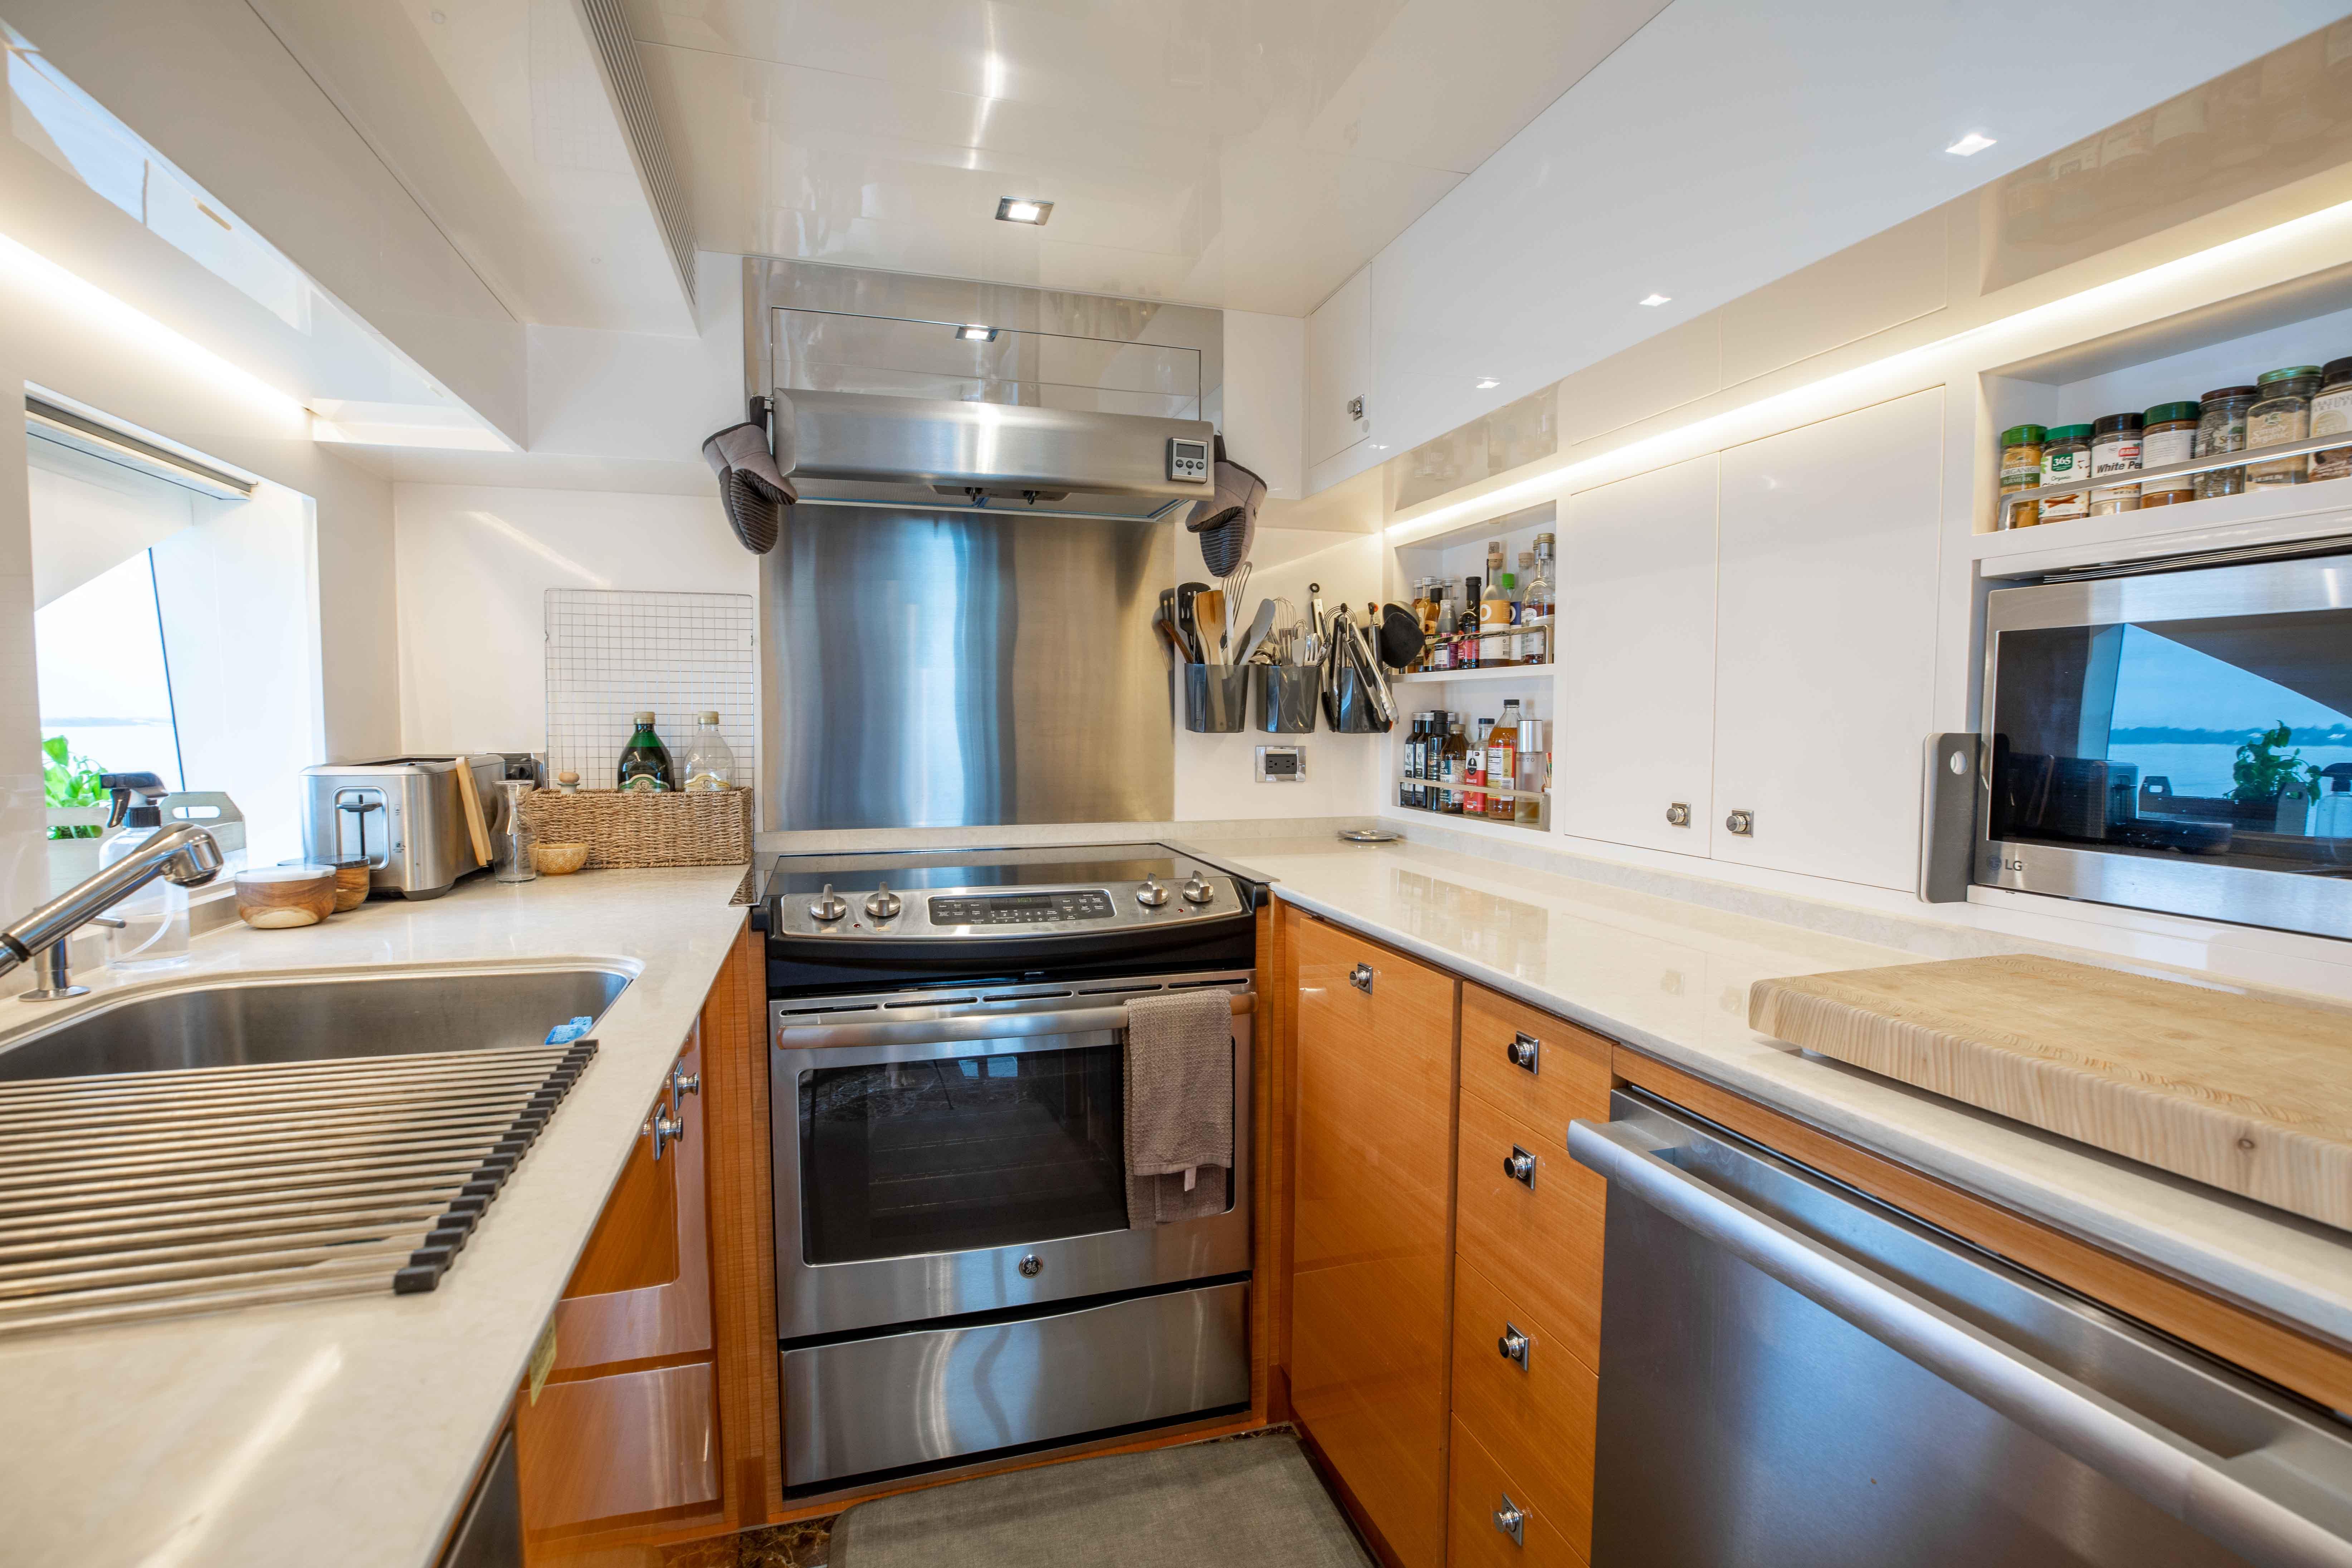 Galley Counters and Appliances